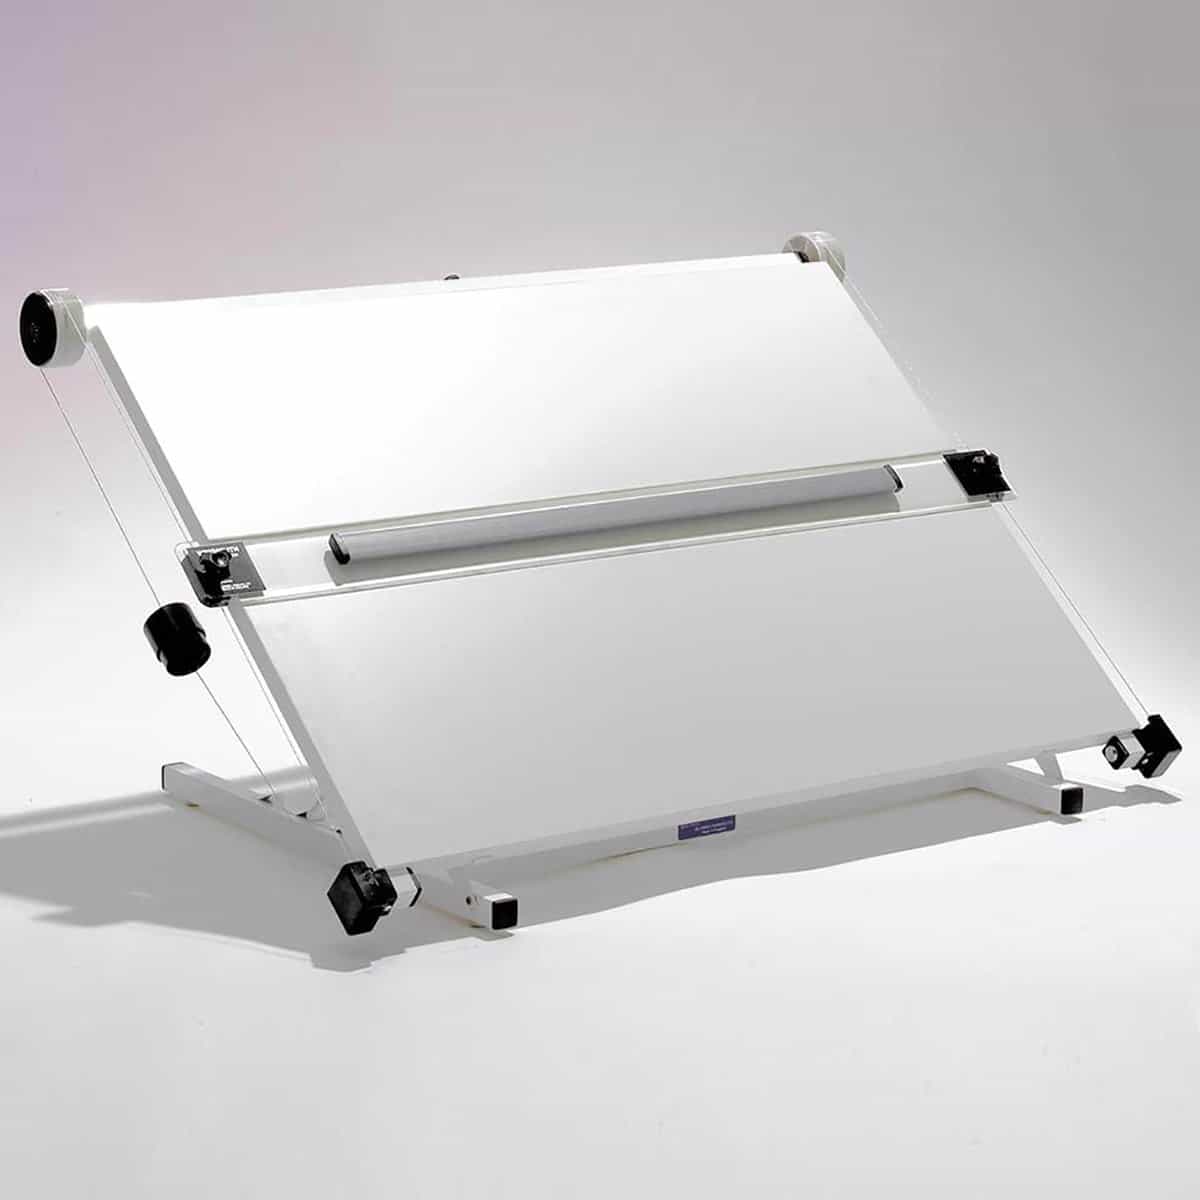 Champion Drawing Board - Blundell Harling